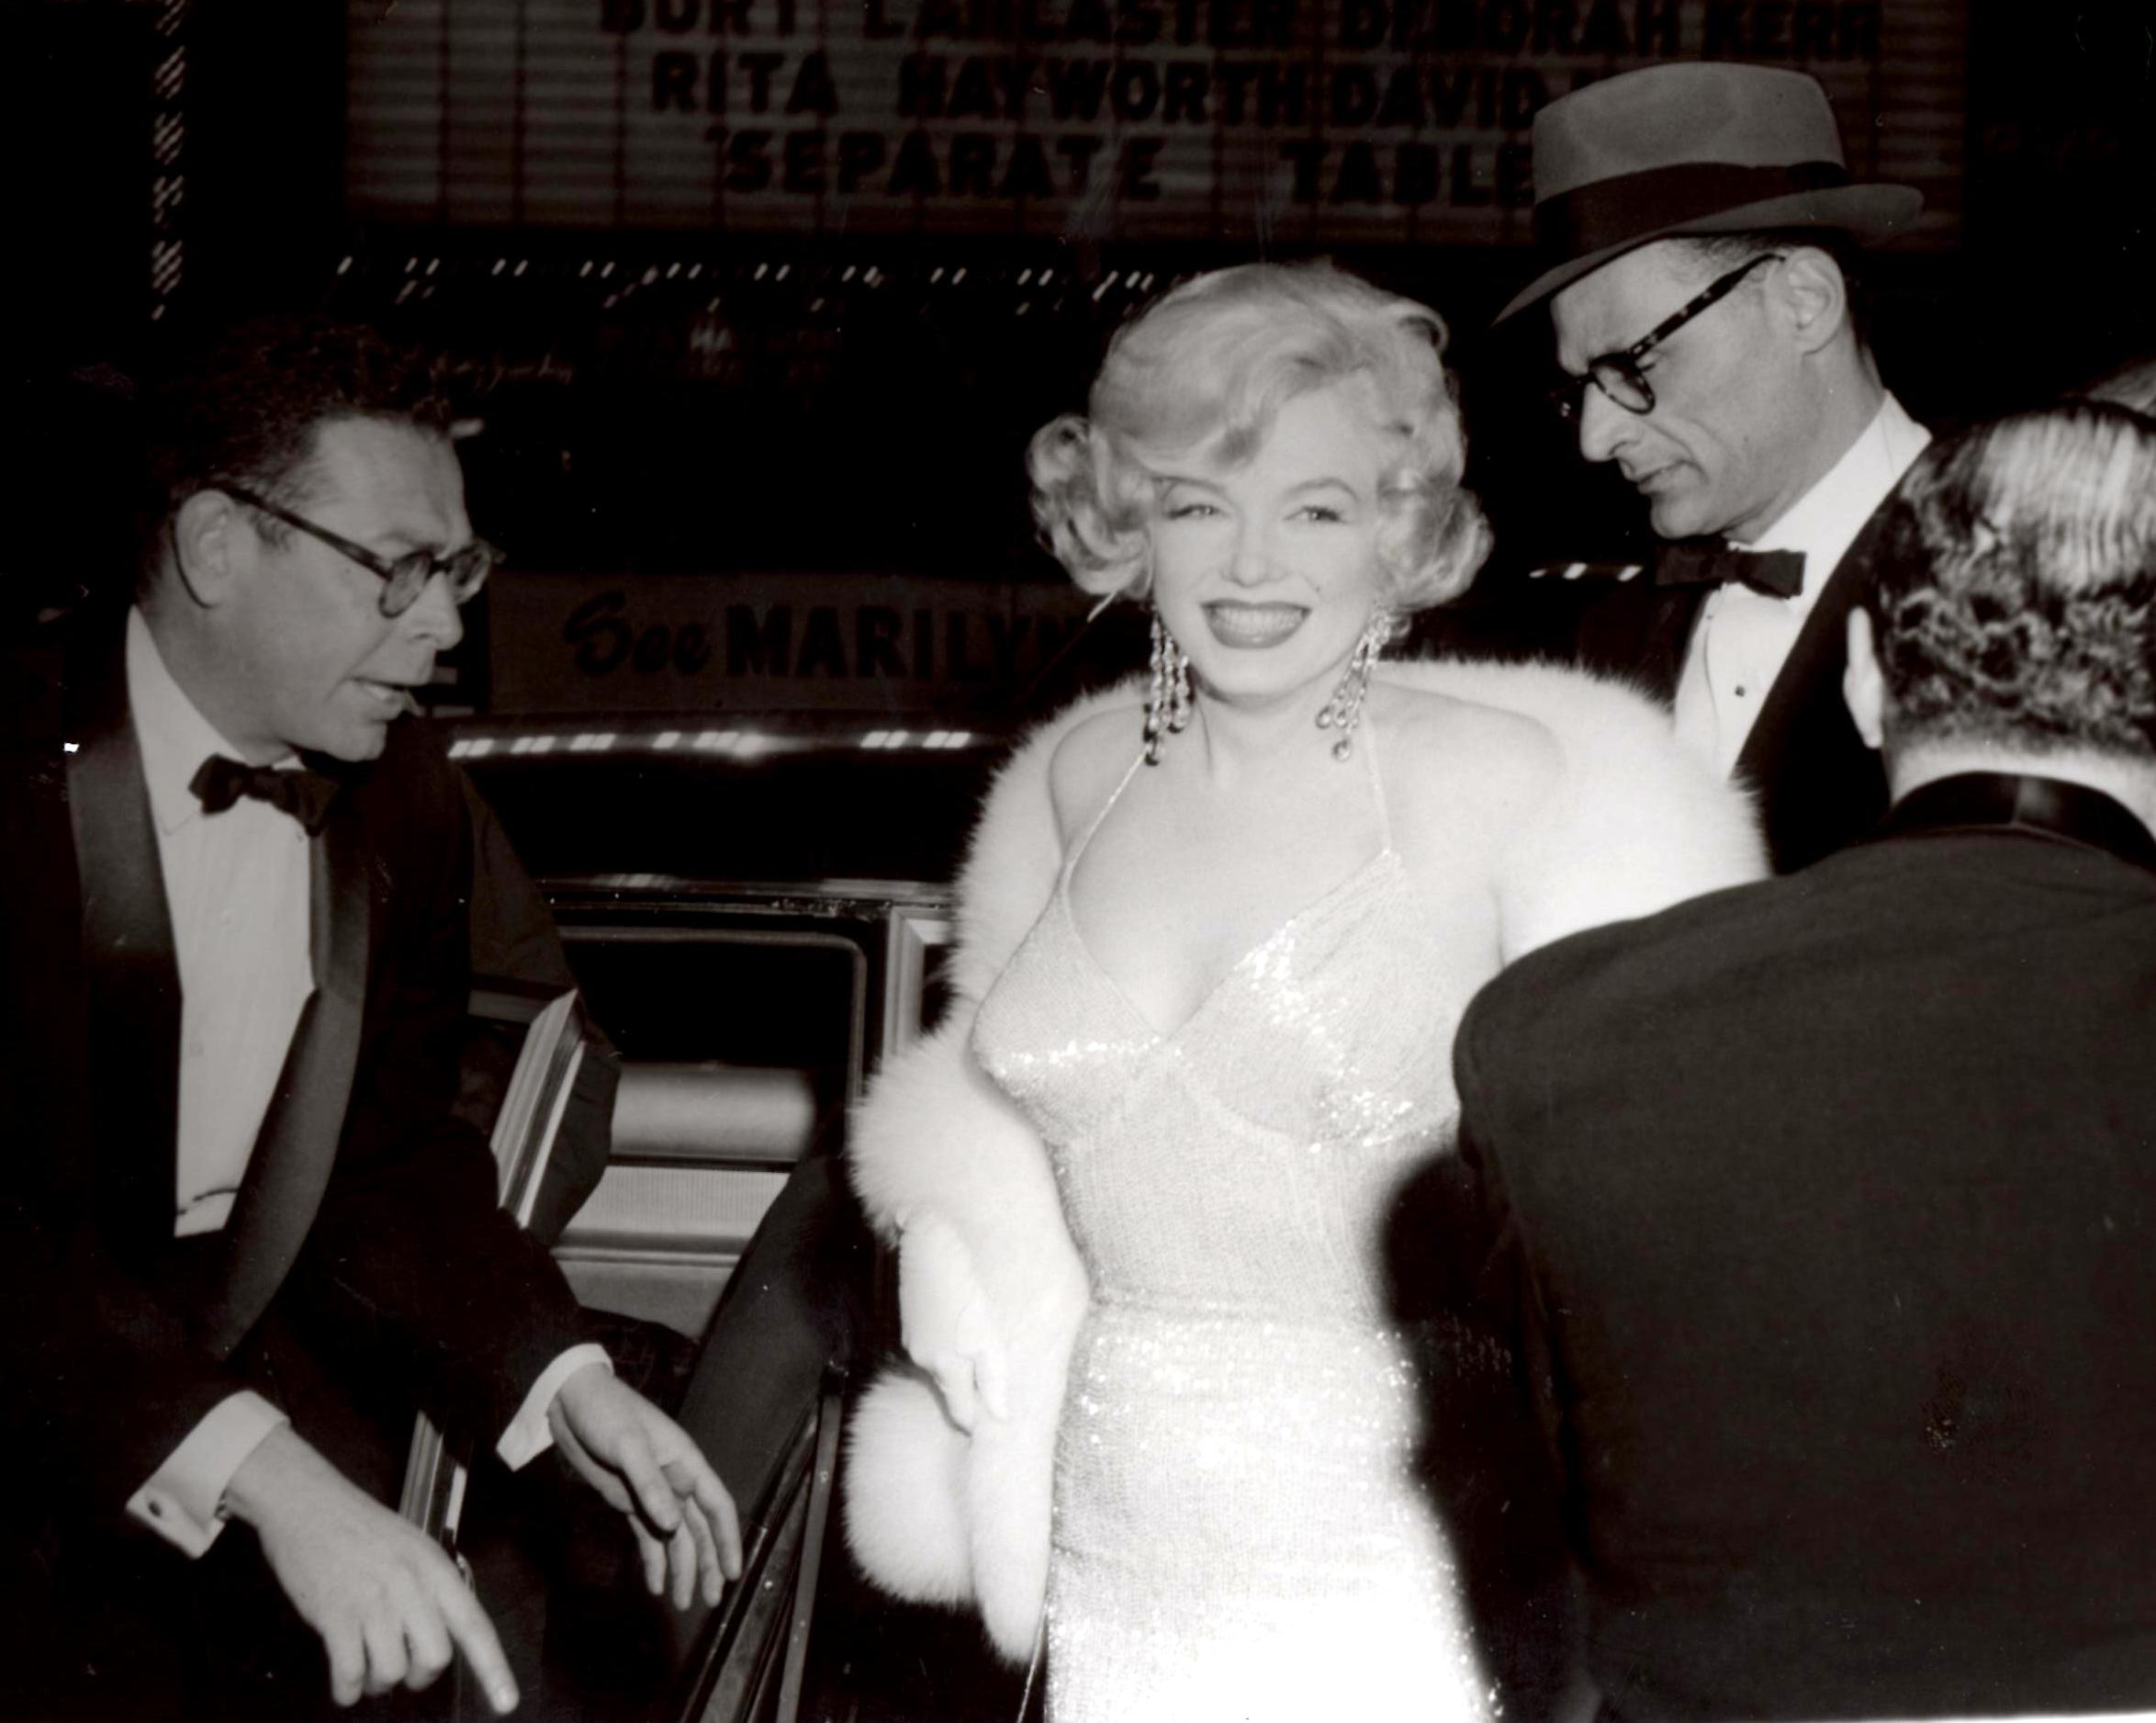 Marilyn Monroe and Arthur Miller (PHOTO BY BARRY TAUB)